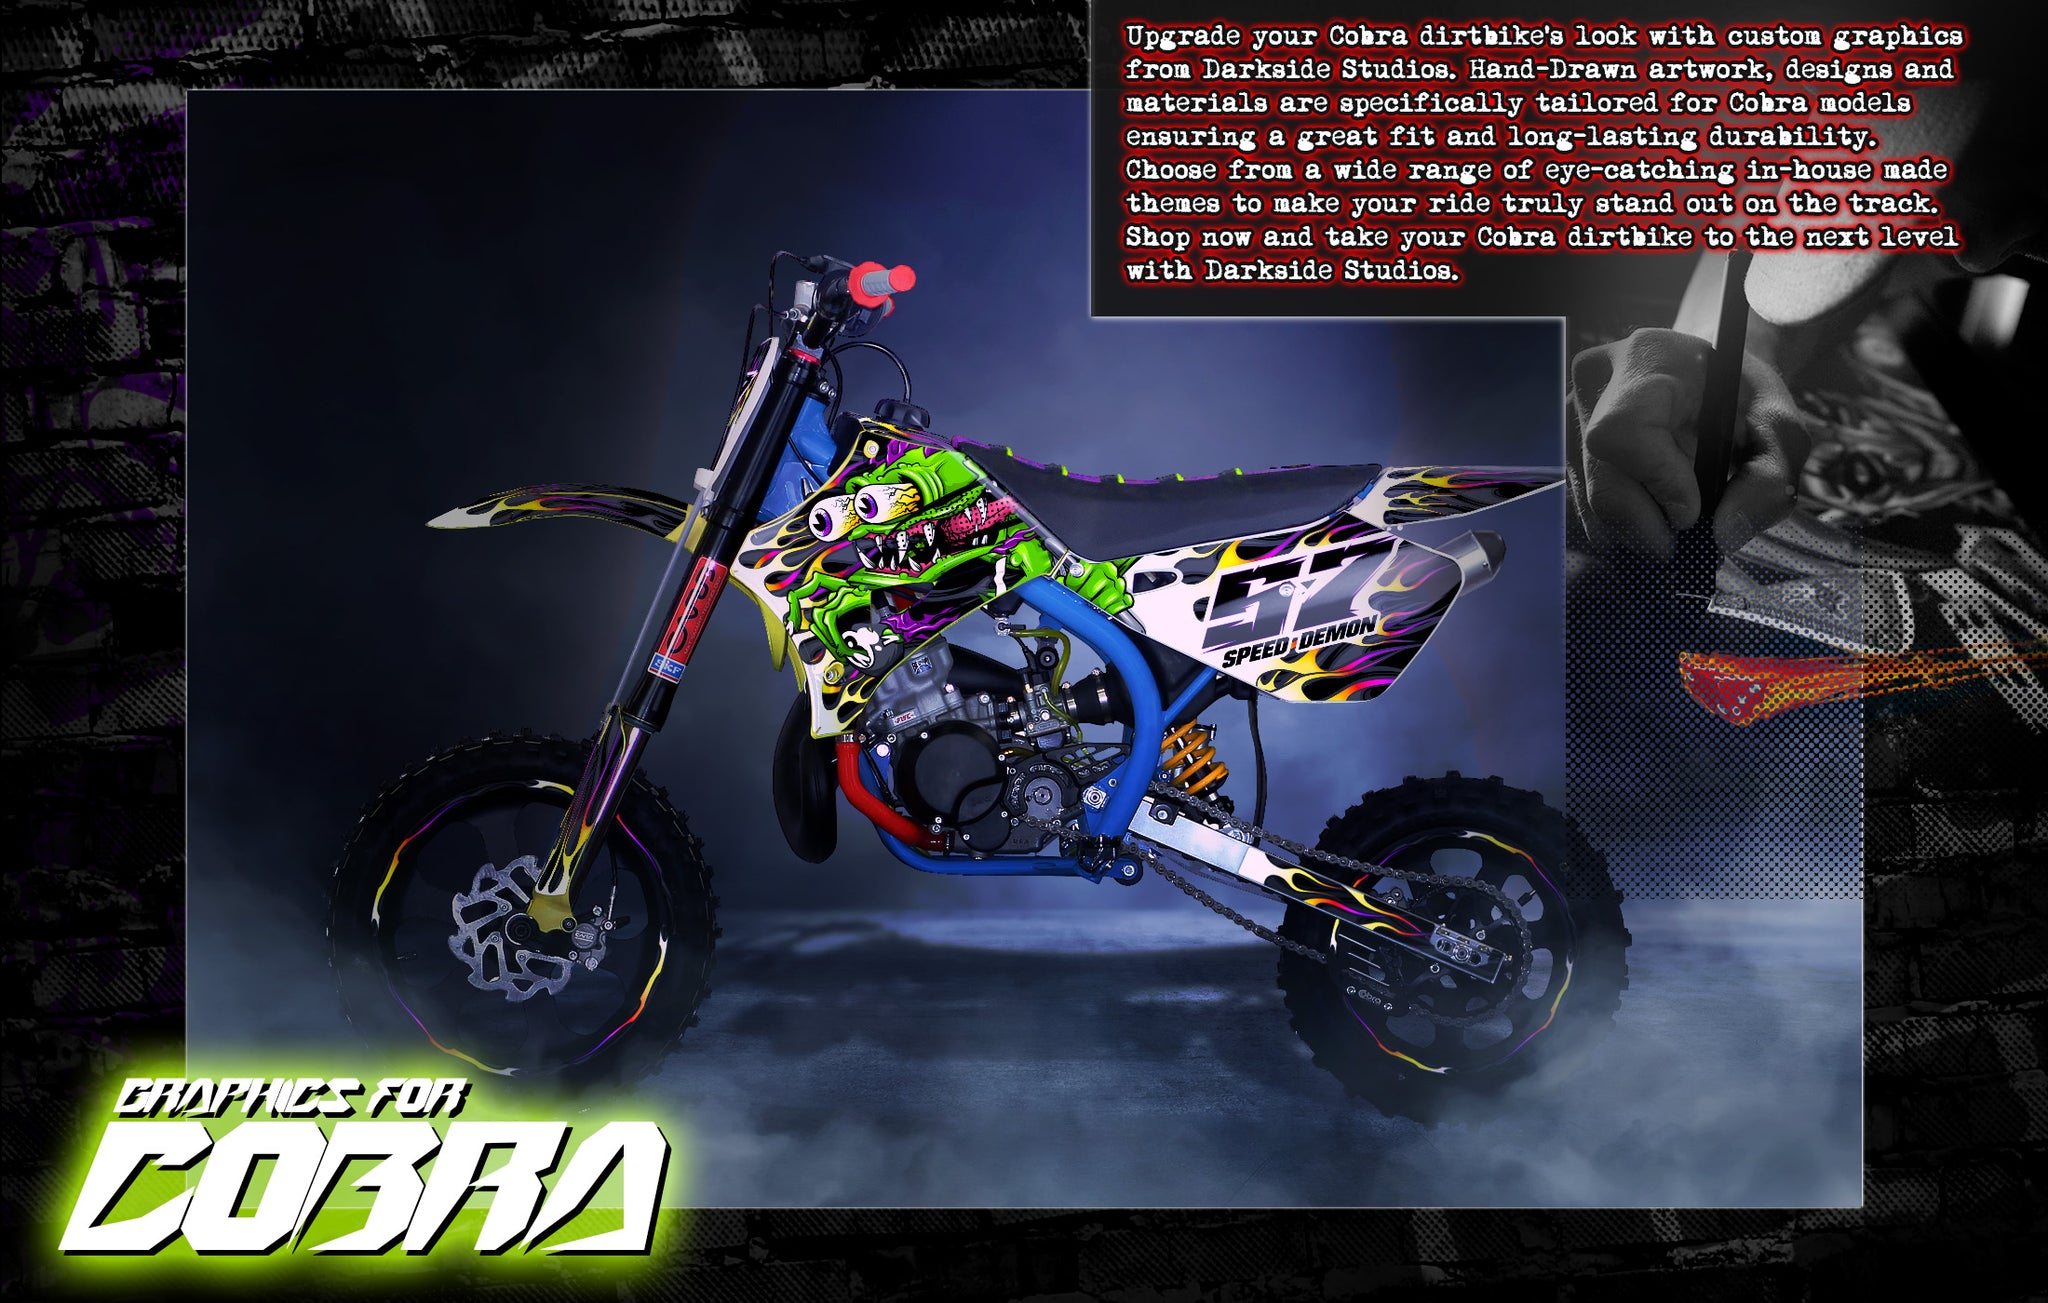 Upgrade your Cobra dirtbike's look with custom graphics from Darkside Studios. Our top-quality designs and materials are specifically tailored for Cobra models such as CX50 and CX65, ensuring a perfect fit and long-lasting durability. Choose from a wide range of eye-catching designs to make your ride truly stand out on the track. Shop now and take your Cobra dirtbike to the next level with Darkside Studios.